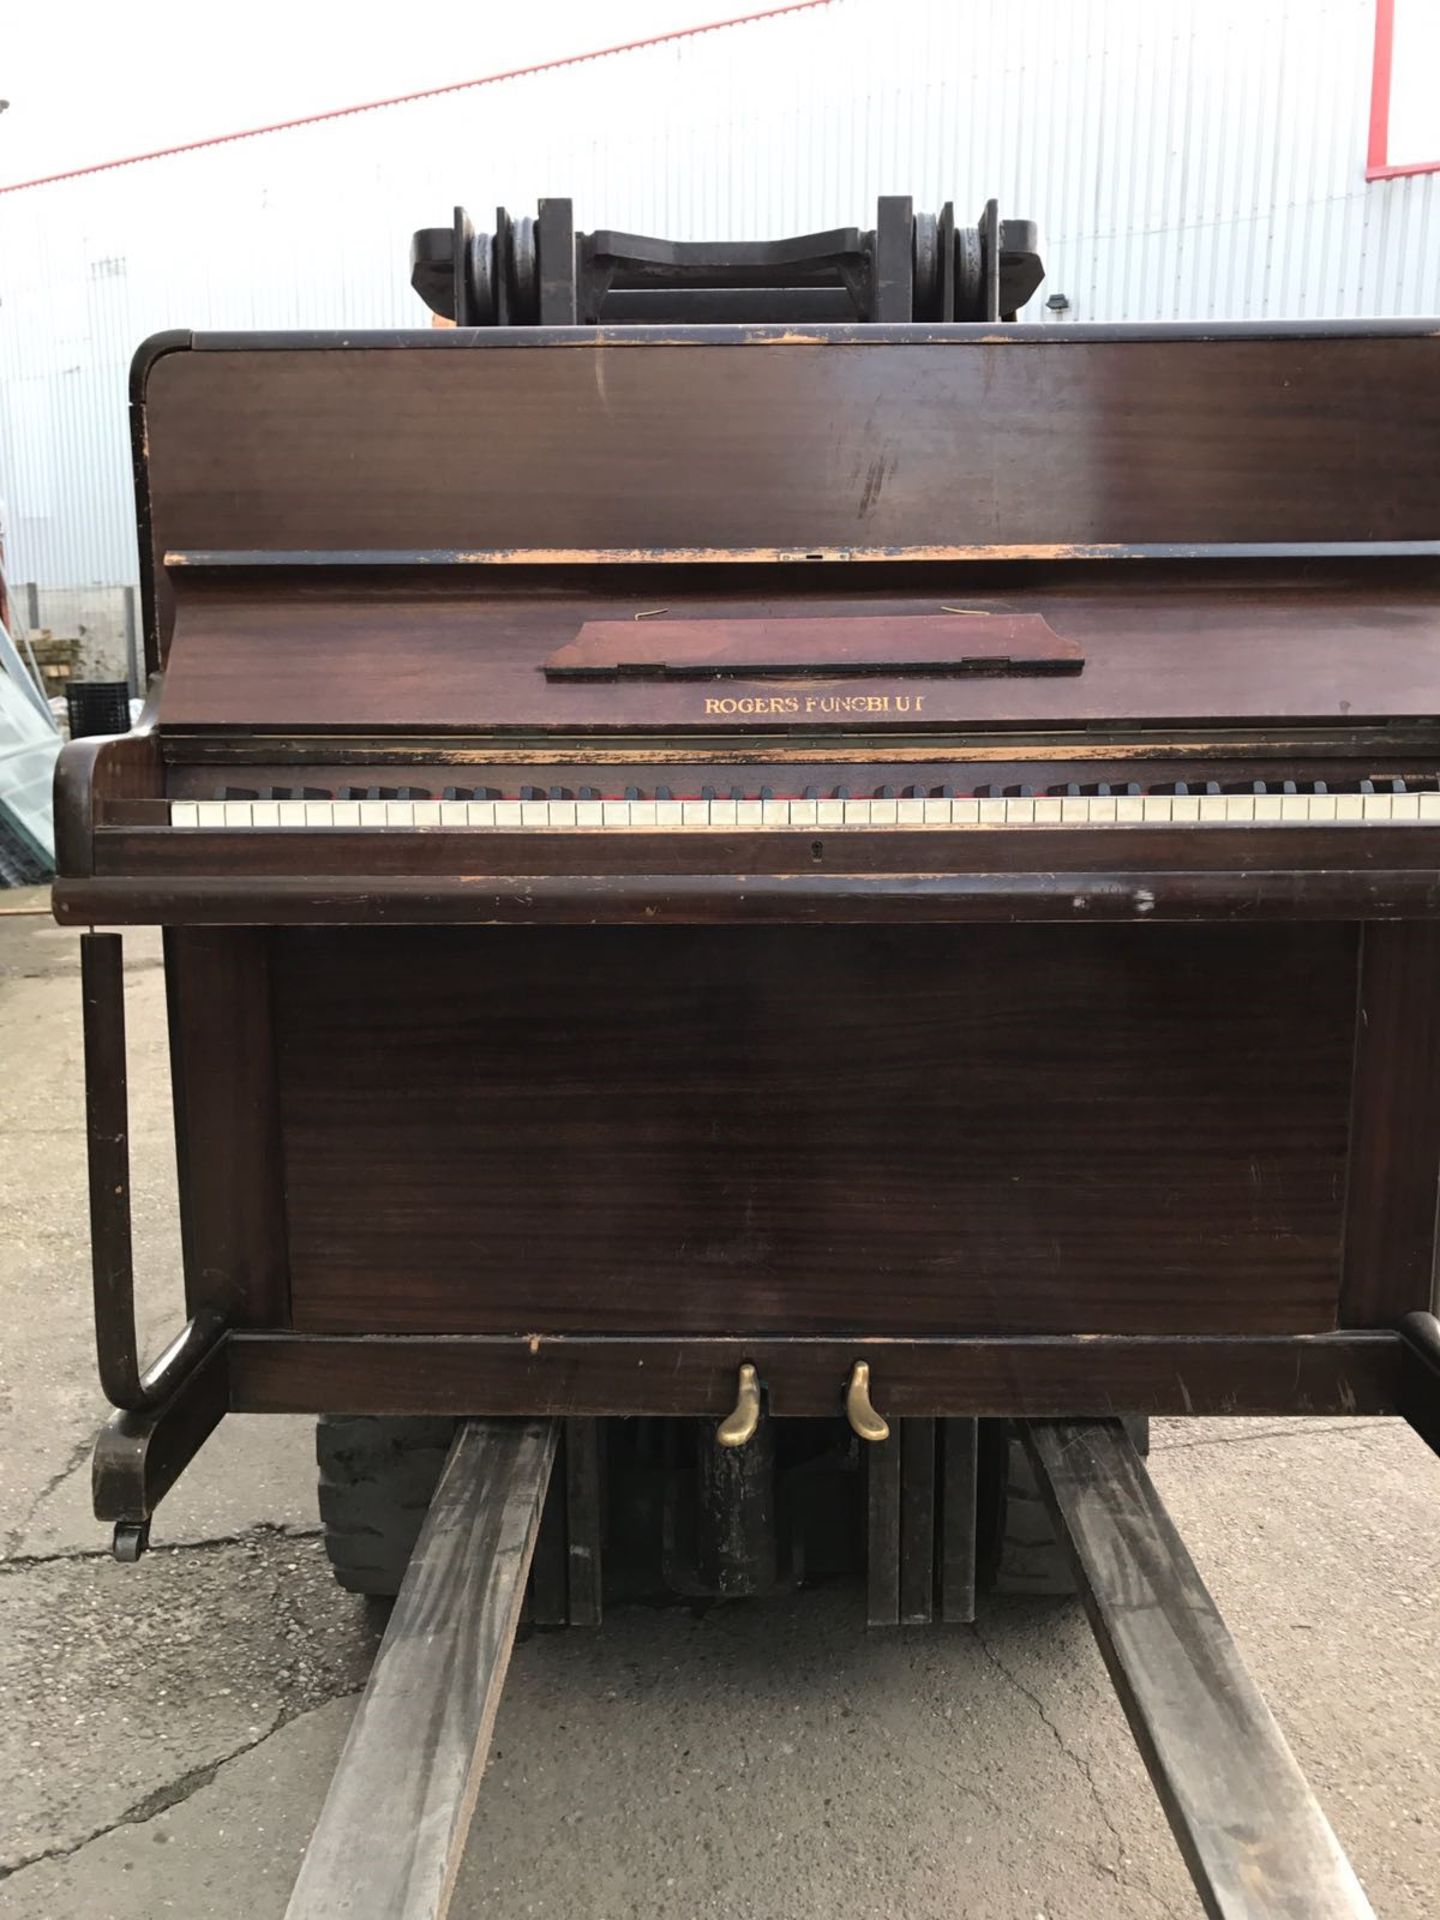 Rogers Eungblut Piano